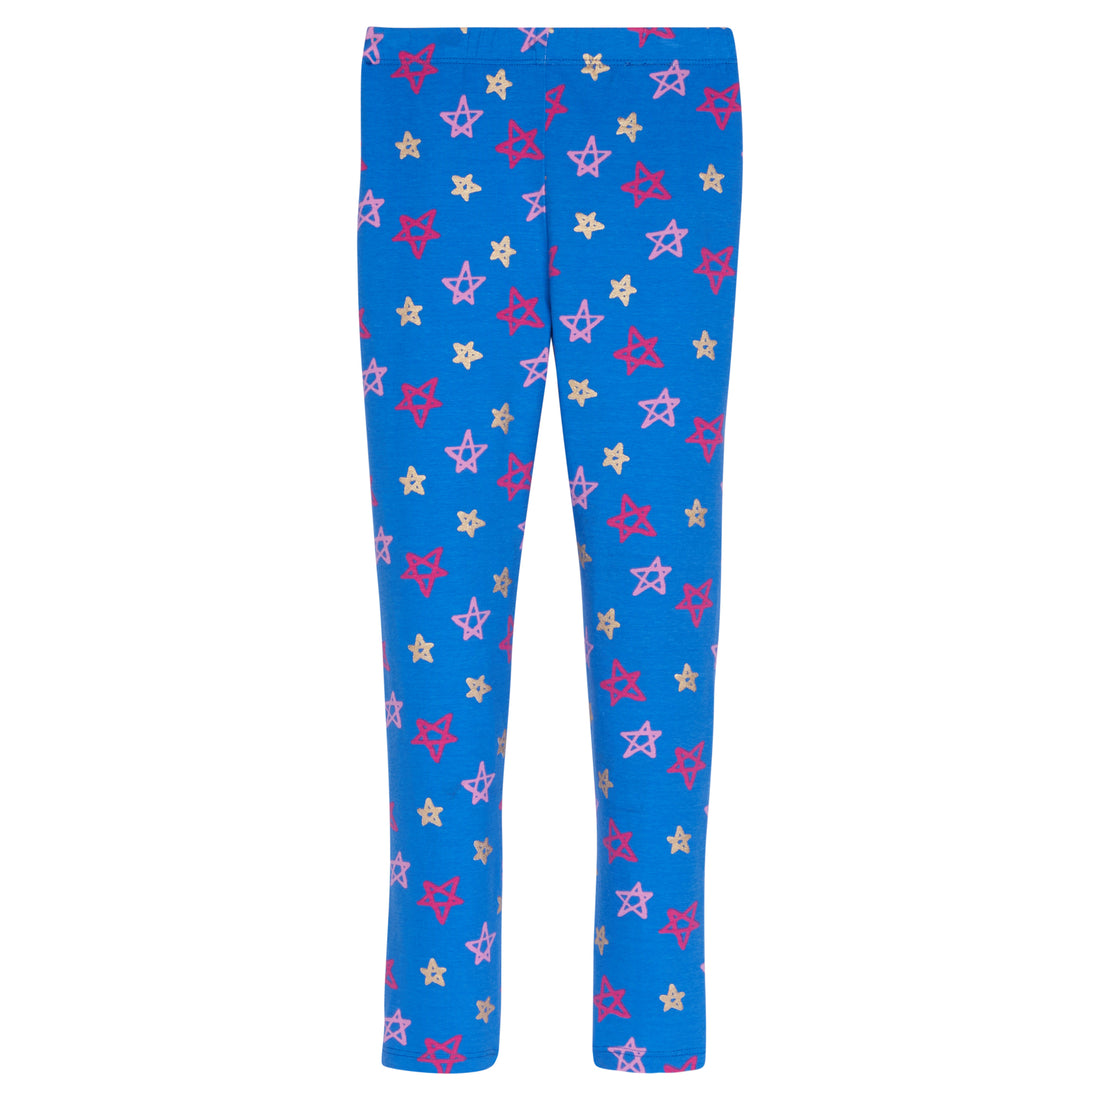 Leggings back with our Sparkle Star pattern. These royal blue leggings have gold and pink colored stars printed all around them--BISBY girl